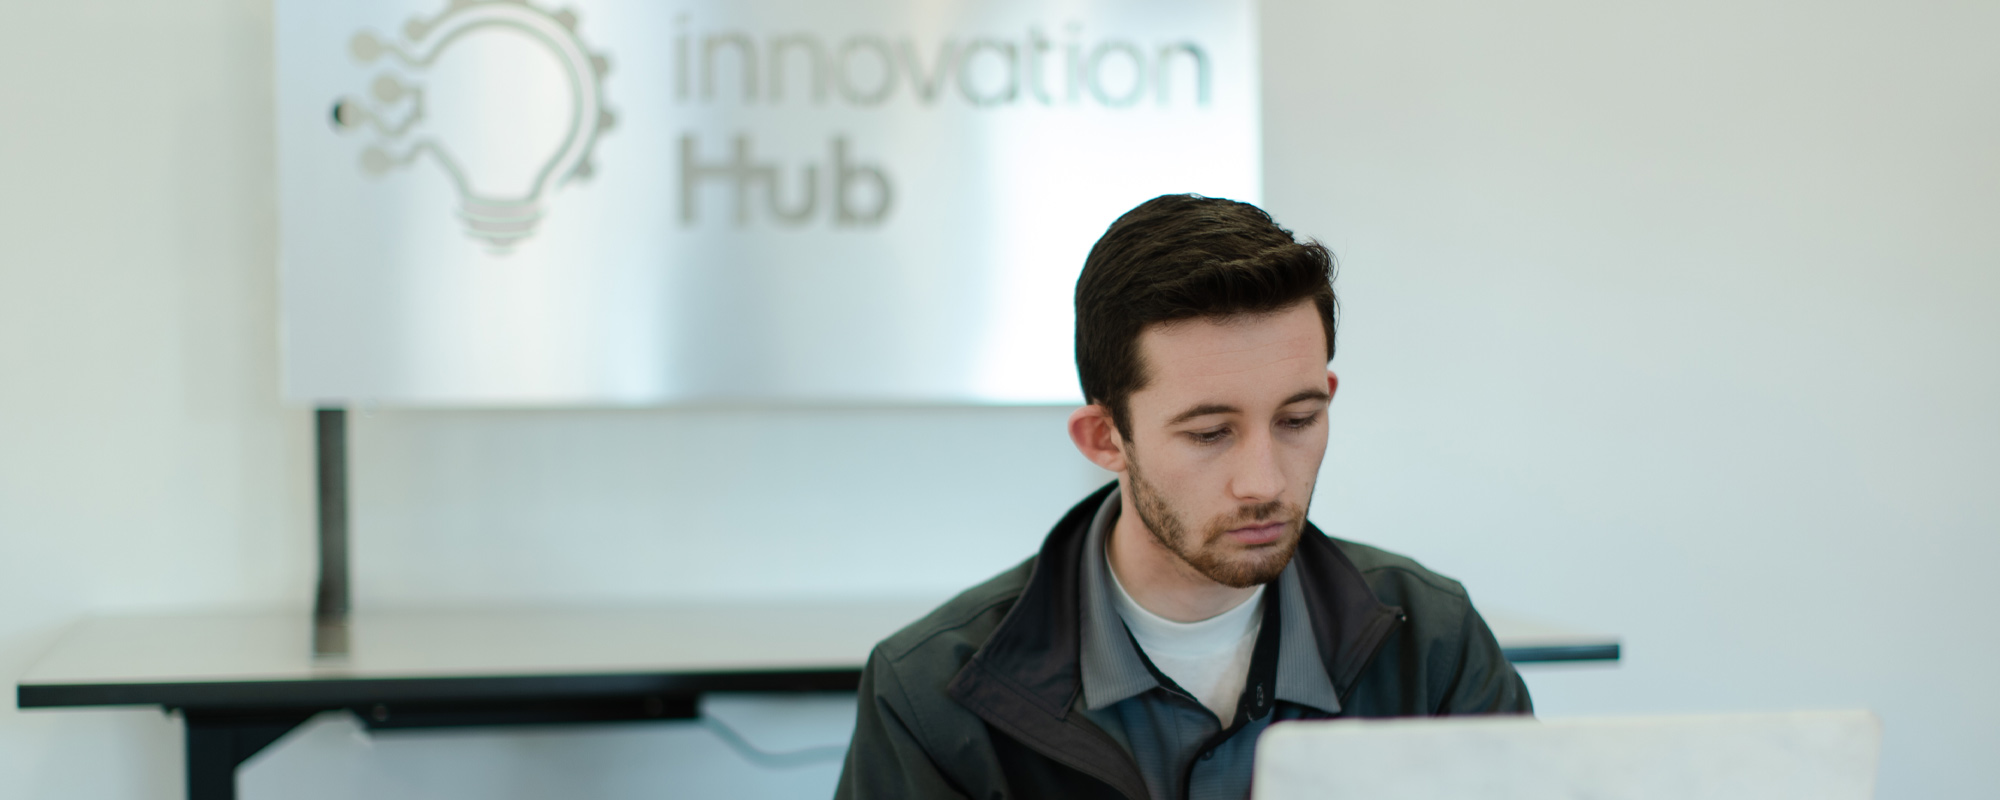 Featured image for “Vernal’s Innovation Hub”